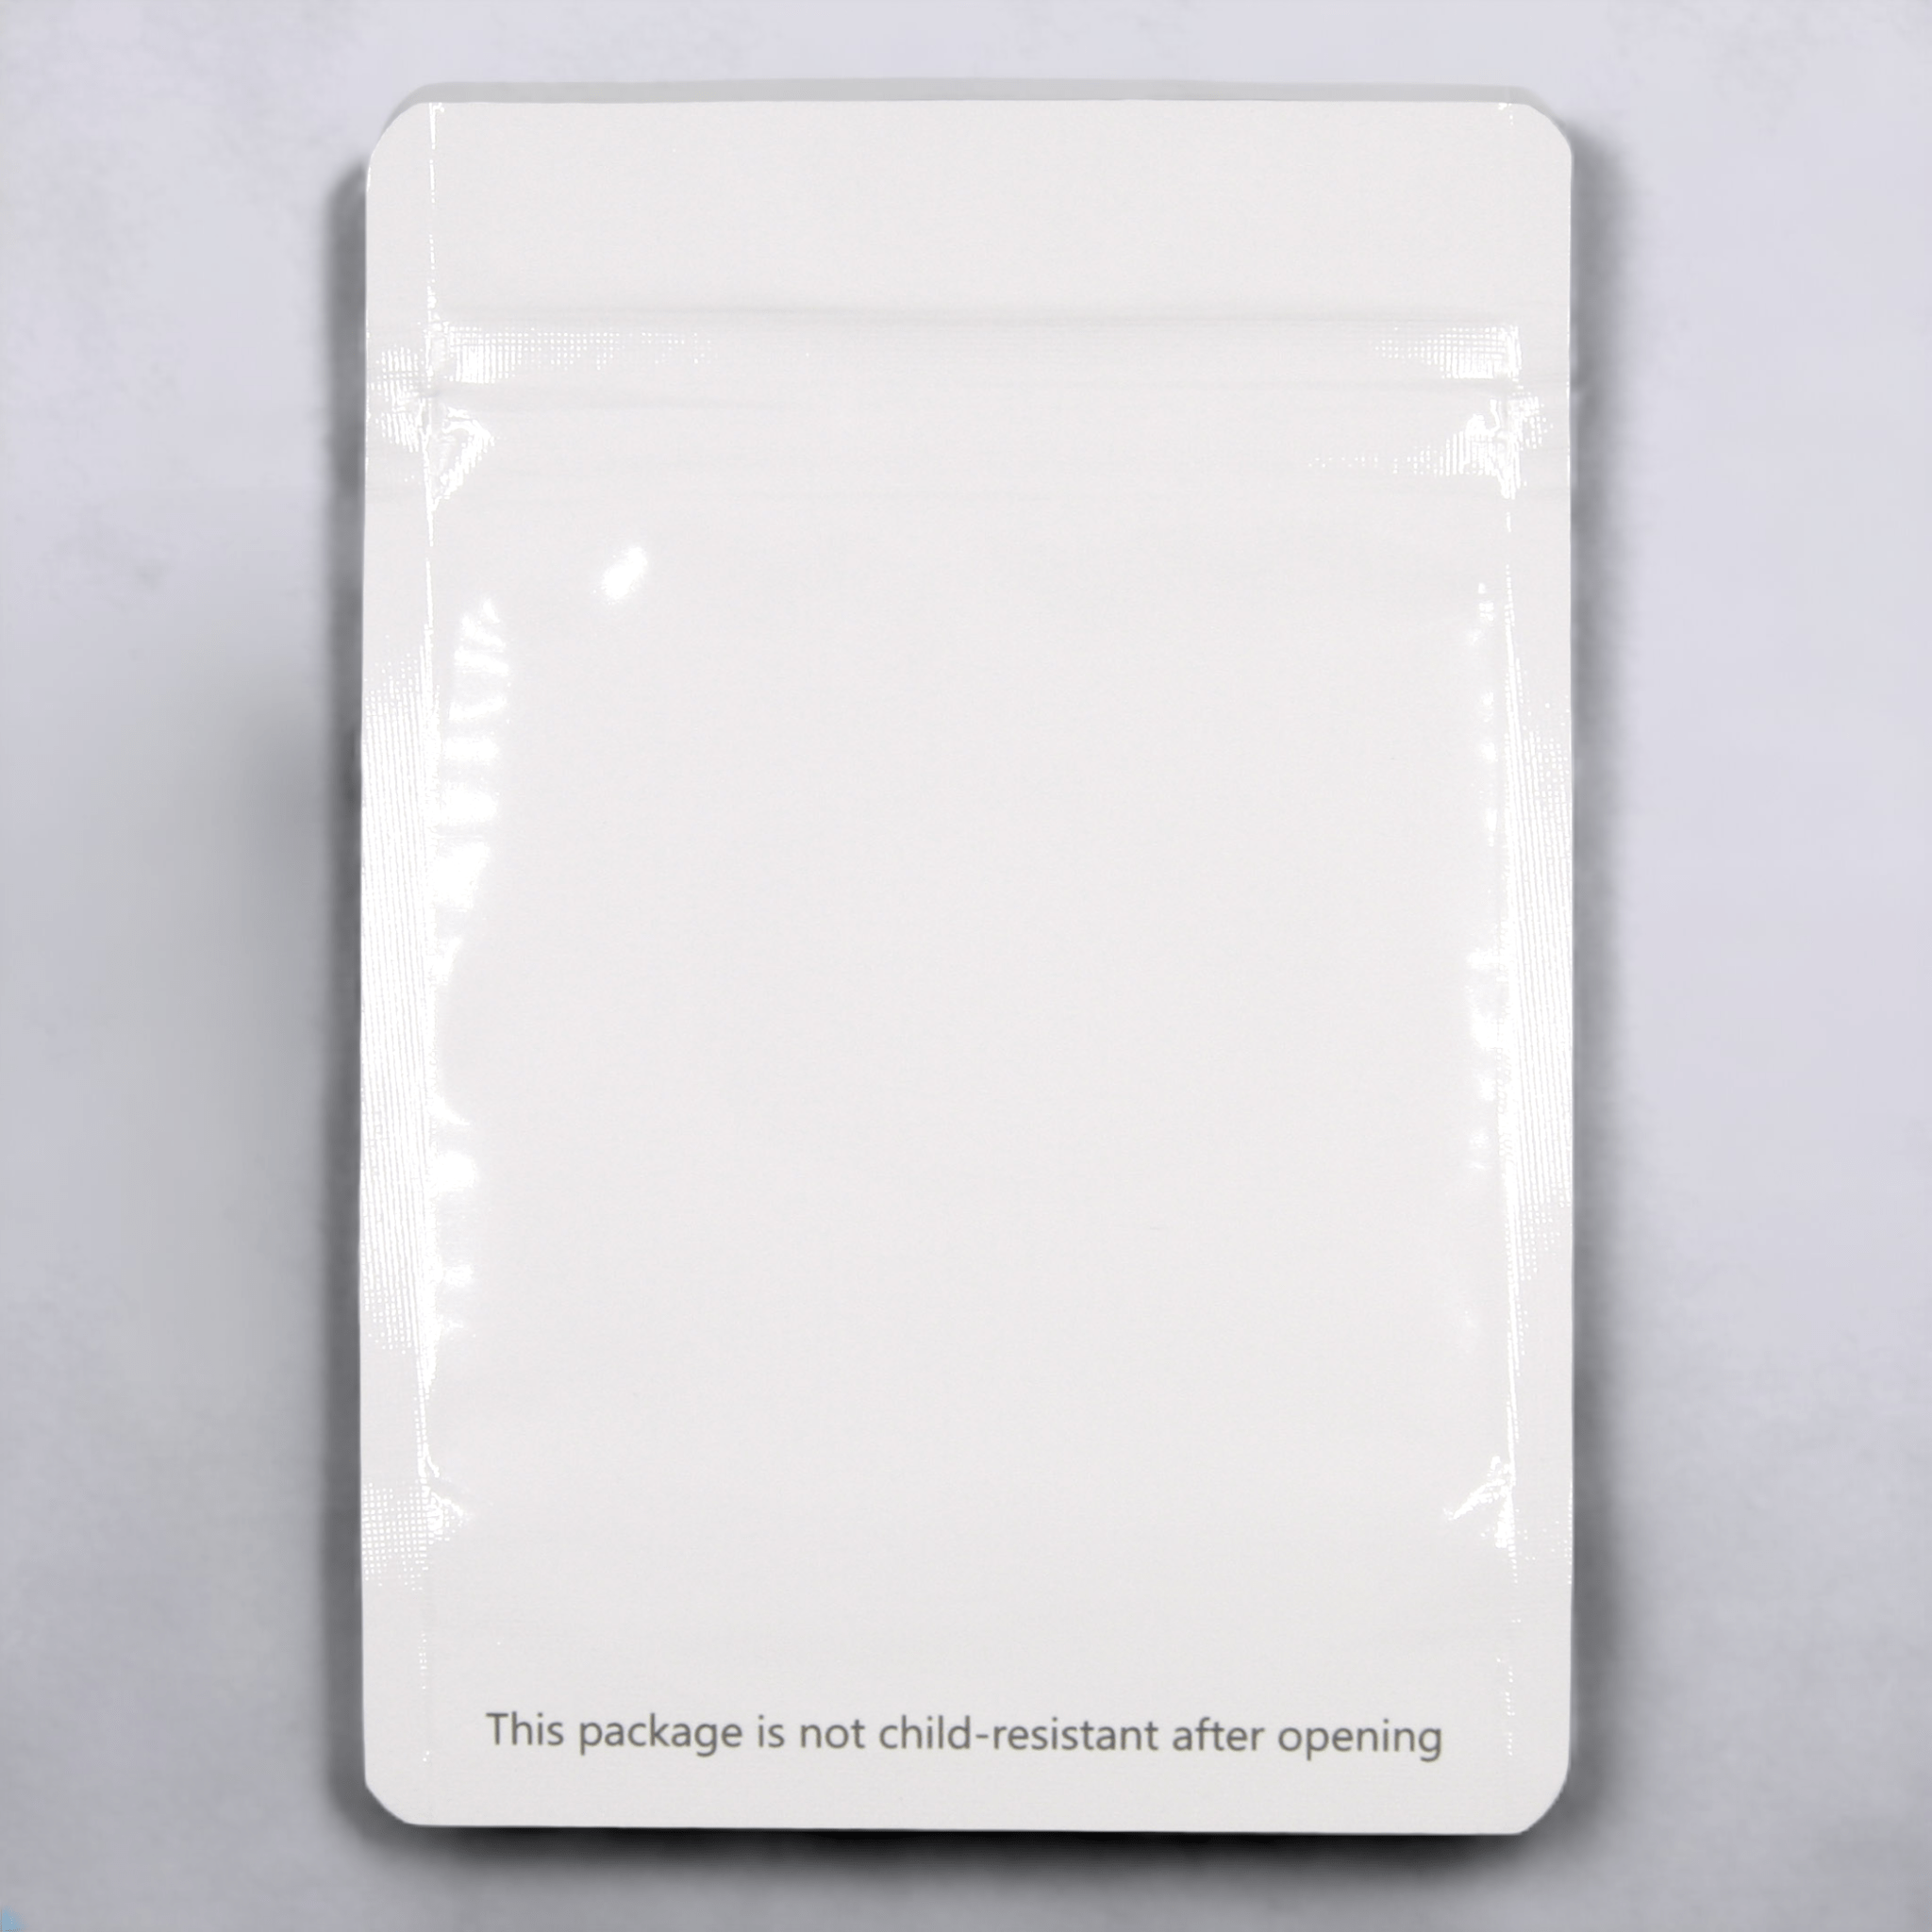 https://cdn.shopify.com/s/files/1/2612/8356/products/bag-king-clear-front-mylar-bag-1-8th-oz-39099562787064.png?v=1681506766